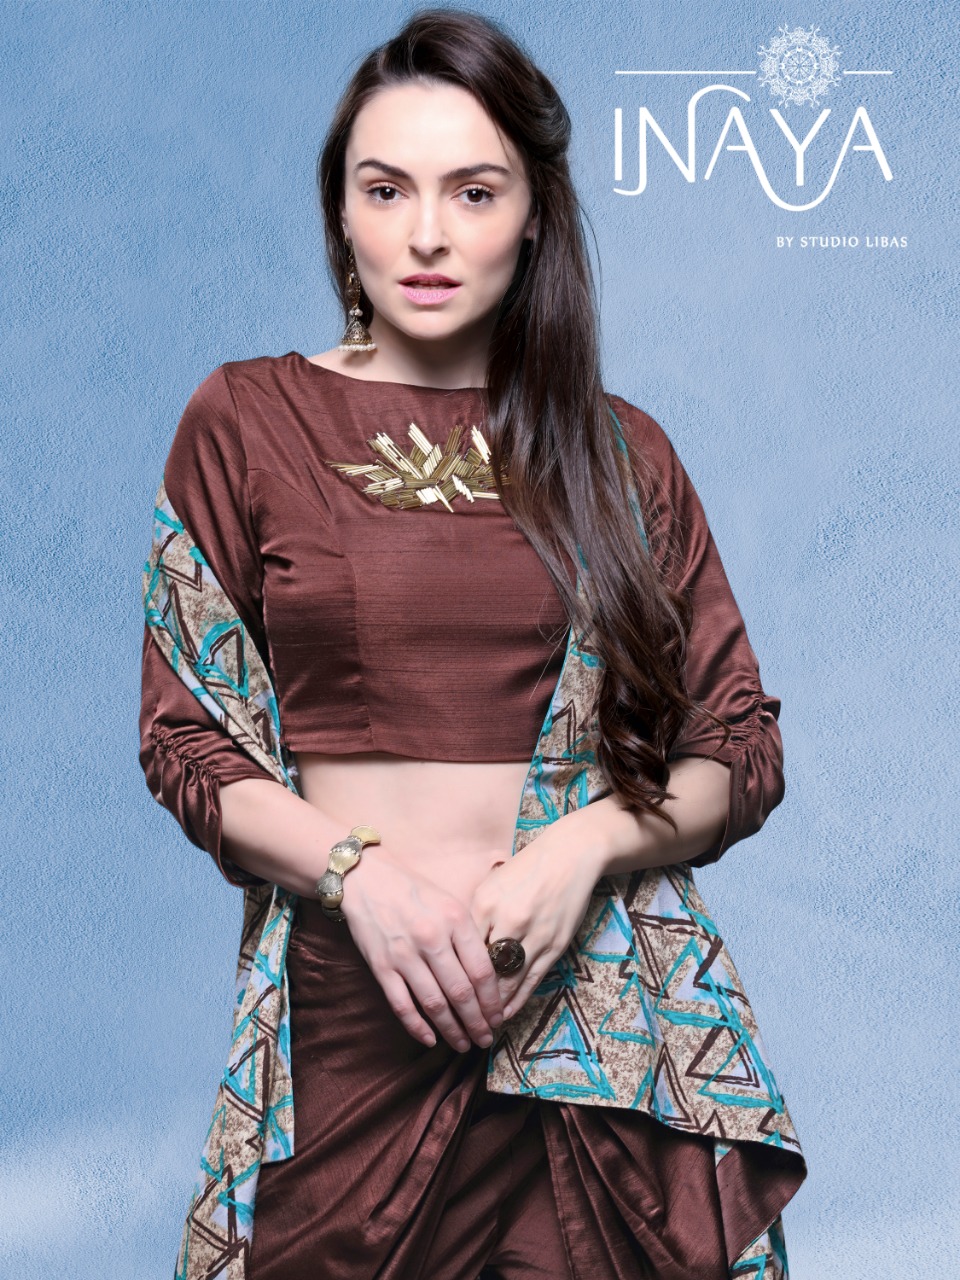 Inaya by studio launch jacket and dhoti designer party wear concept of new style jacket with dhoti